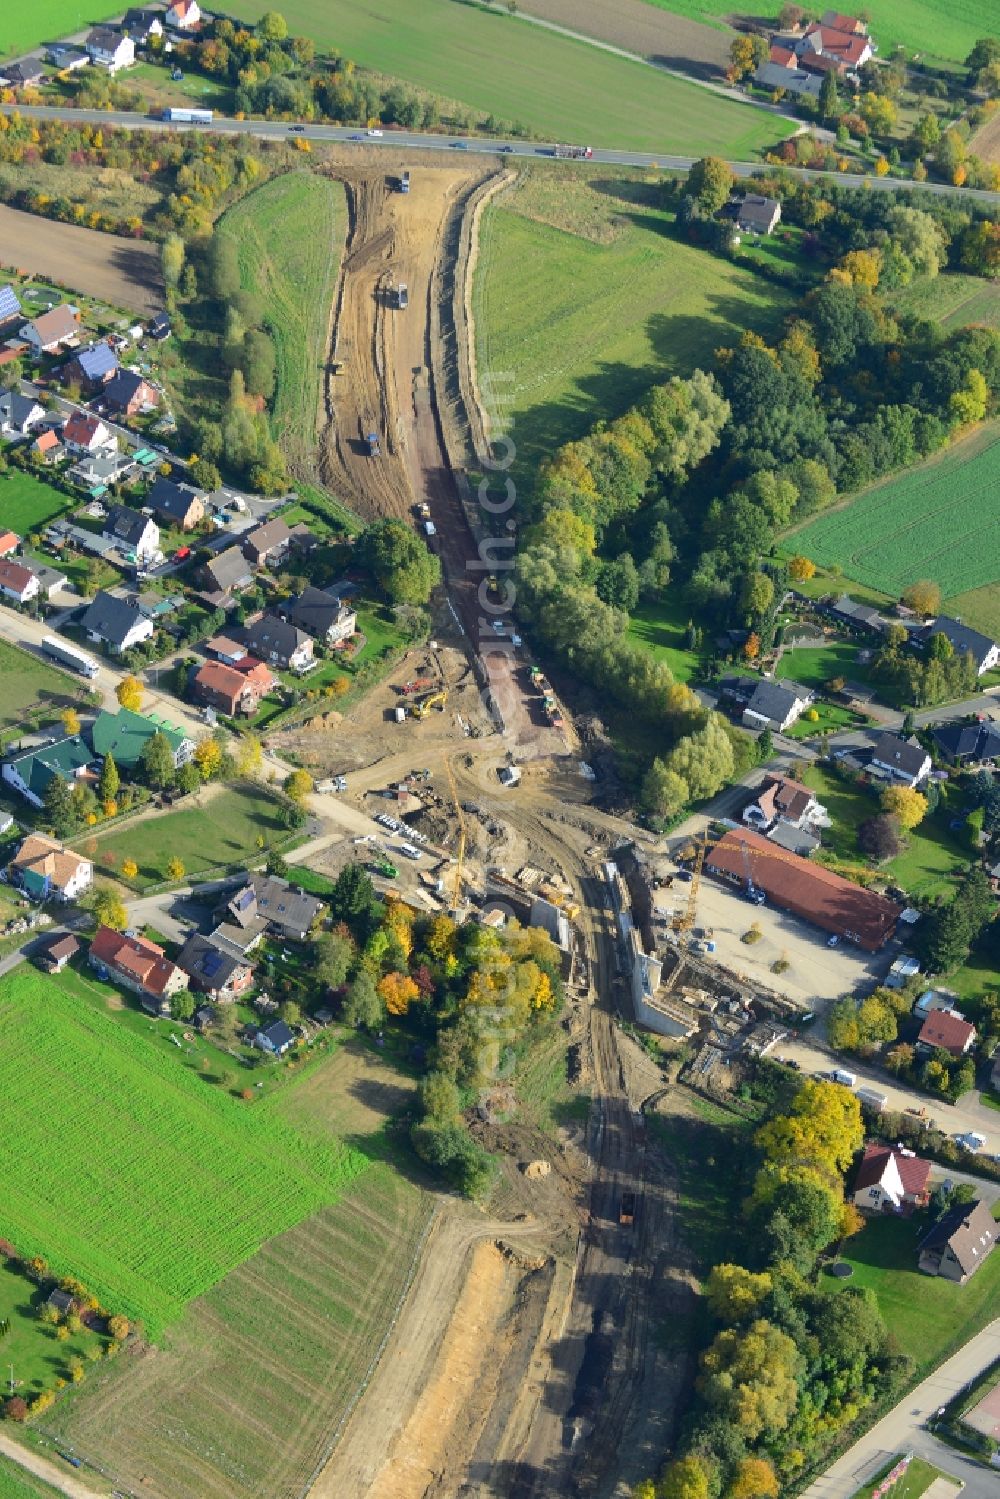 Kirchlengern from above - View of the construction site of a building bridge to bypass road north of Kirchlengern in North Rhine-Westphalia